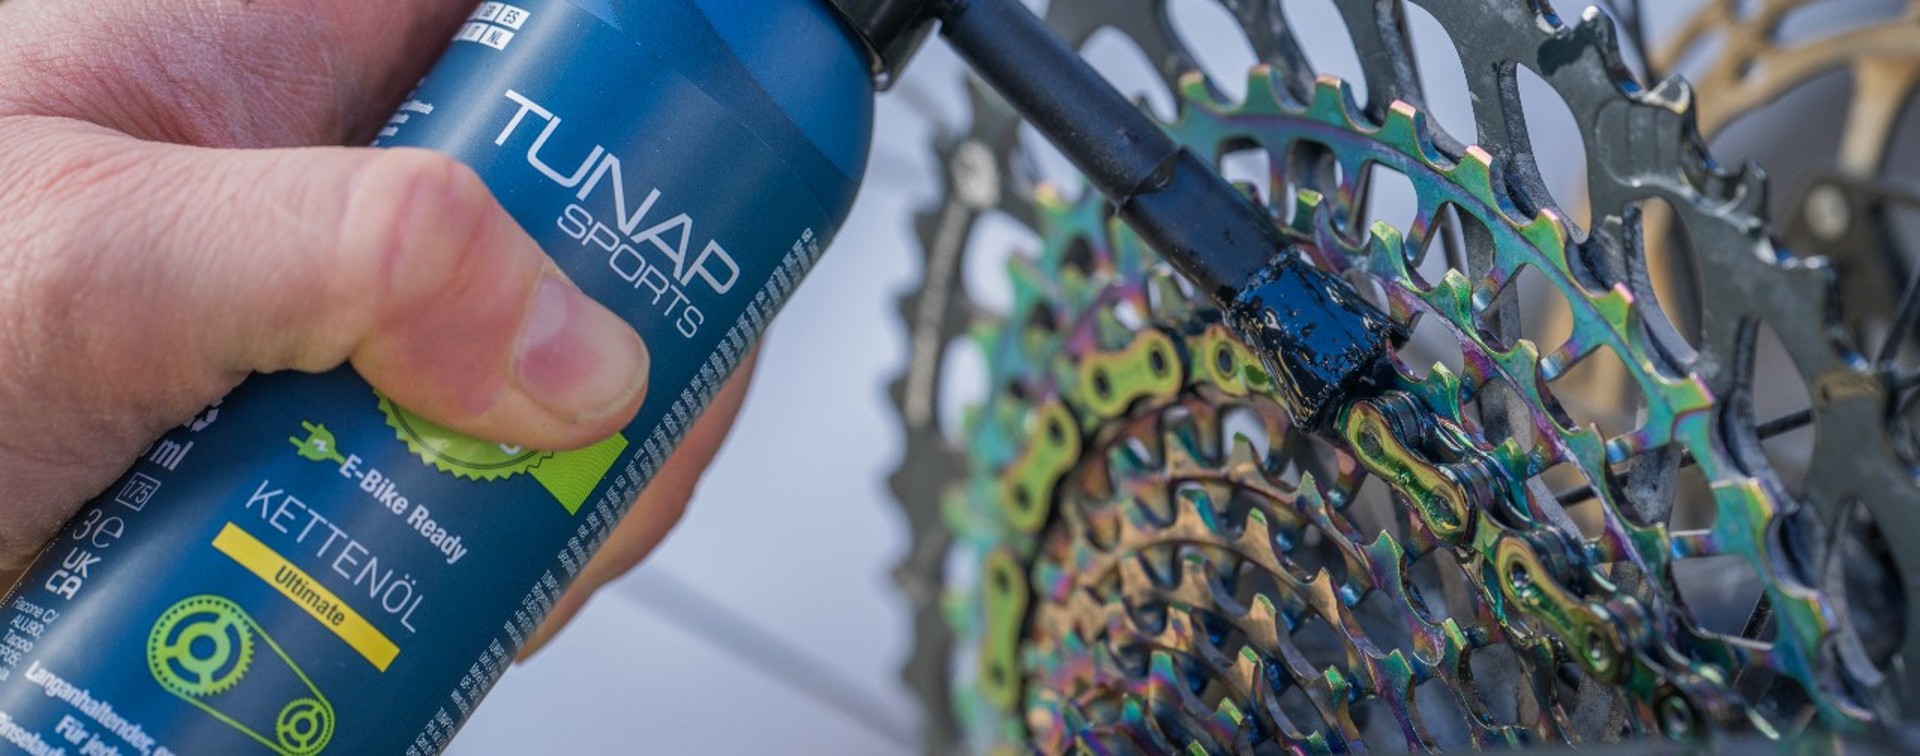 The Test Winner Gets Even Better: Our Ultimate Chain Oil is Now Available as a Practical Spray